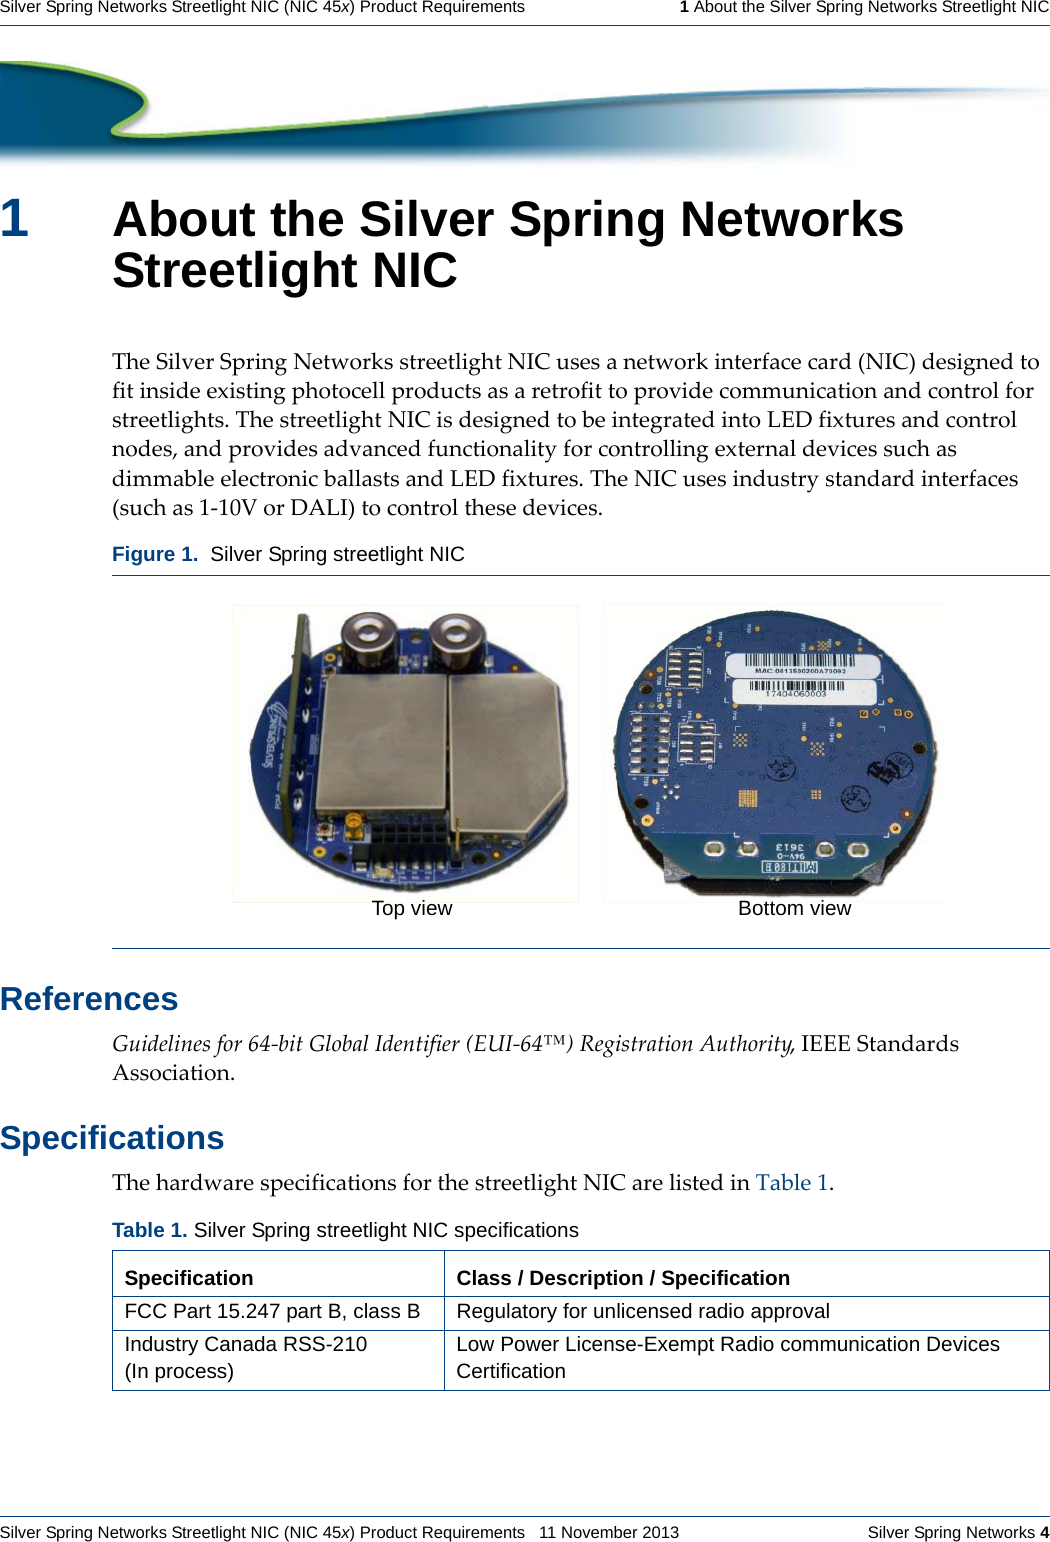 Silver Spring Networks Streetlight NIC (NIC 45x) Product Requirements   11 November 2013    Silver Spring Networks 4Silver Spring Networks Streetlight NIC (NIC 45x) Product Requirements   1 About the Silver Spring Networks Streetlight NIC1About the Silver Spring Networks Streetlight NICTheSilverSpringNetworksstreetlightNICusesanetworkinterfacecard(NIC)designedtofitinsideexistingphotocellproductsasaretrofittoprovidecommunicationandcontrolforstreetlights.ThestreetlightNICisdesignedtobeintegratedintoLEDfixturesandcontrolnodes,andprovidesadvancedfunctionalityforcontrollingexternaldevicessuchasdimmableelectronicballastsandLEDfixtures.TheNICusesindustrystandardinterfaces(suchas1‐10VorDALI)tocontrolthesedevices.ReferencesGuidelinesfor64‐bitGlobalIdentifier(EUI‐64™)RegistrationAuthority,IEEEStandardsAssociation.SpecificationsThehardwarespecificationsforthestreetlightNICarelistedinTable1.Figure 1.  Silver Spring streetlight NICTable 1. Silver Spring streetlight NIC specifications Specification Class / Description / SpecificationFCC Part 15.247 part B, class B Regulatory for unlicensed radio approvalIndustry Canada RSS-210(In process)Low Power License-Exempt Radio communication Devices CertificationTop view Bottom view